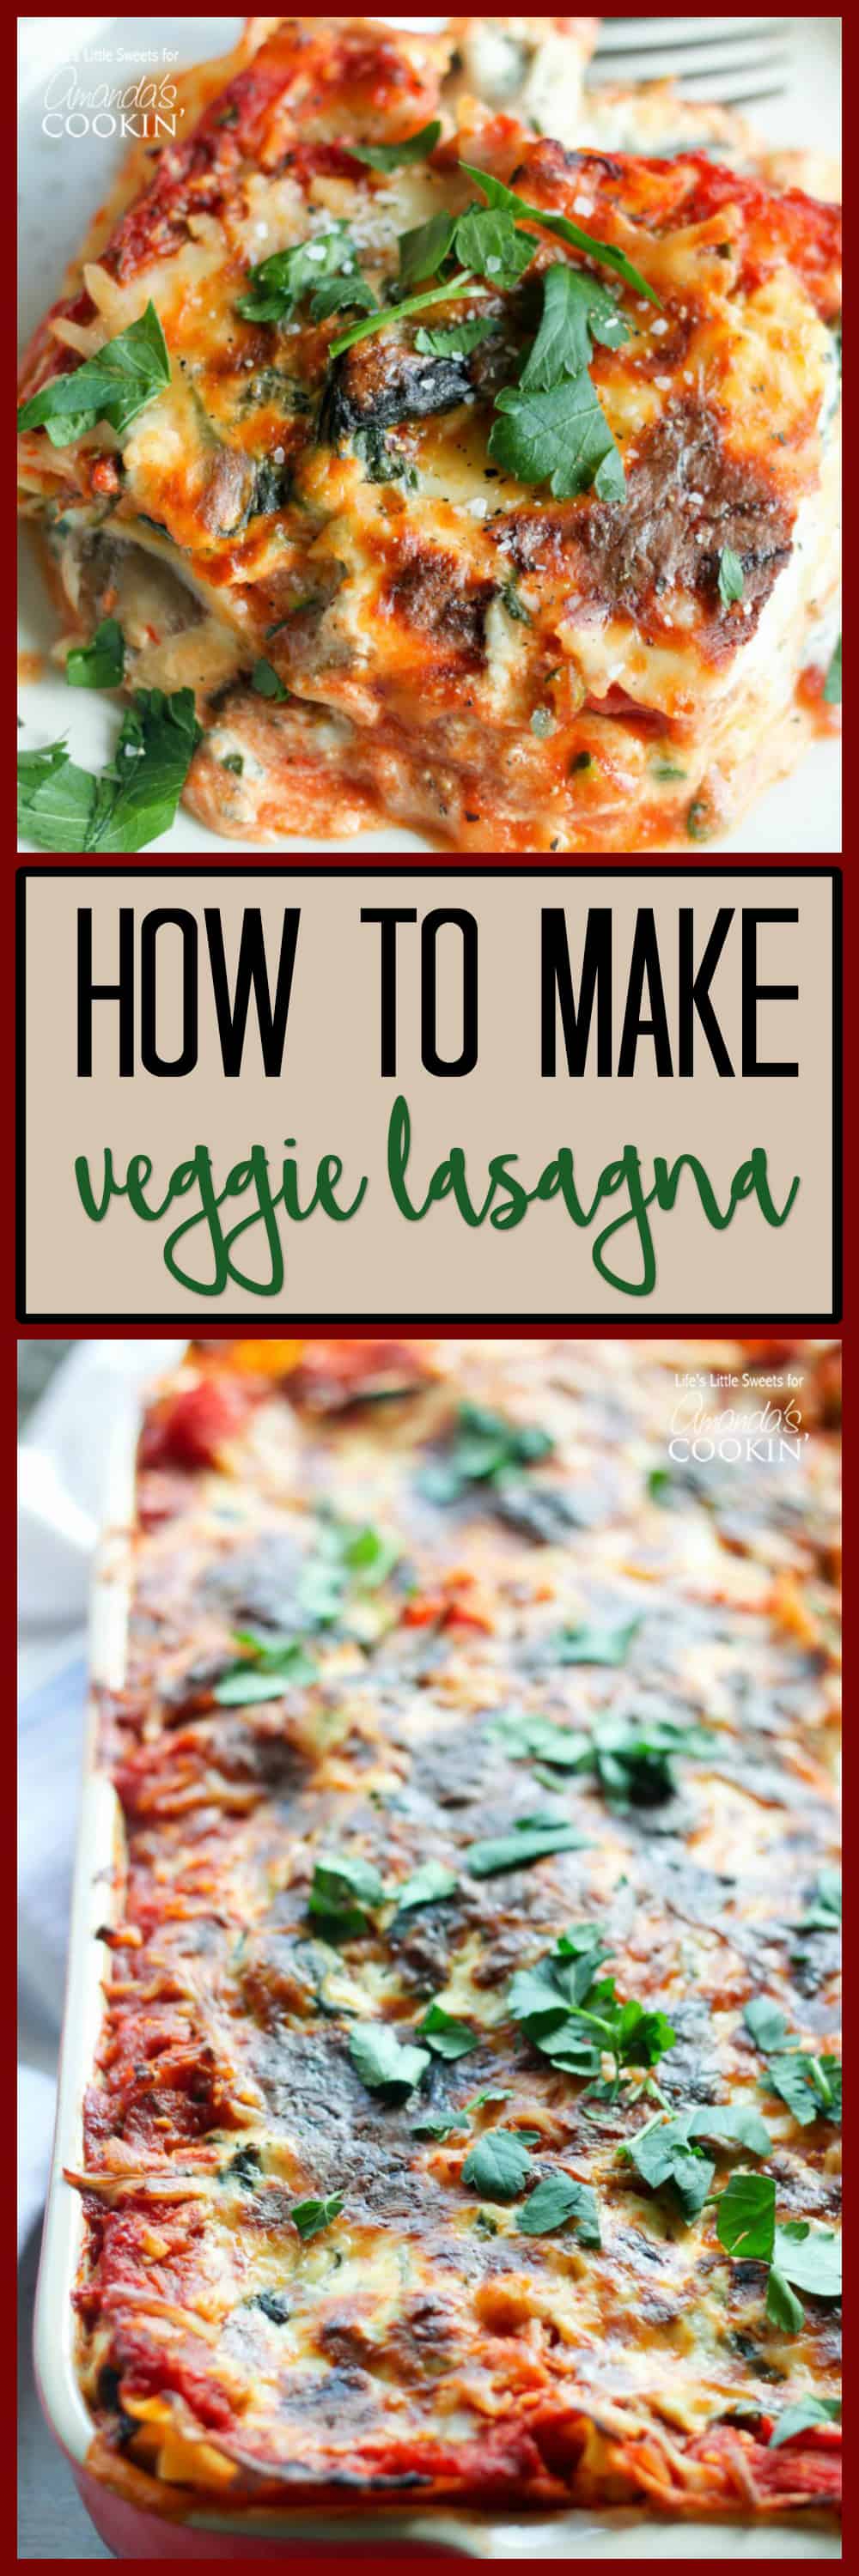 Veggie Lasagna: a delicious and flavorful dinner dish loaded with veggies!